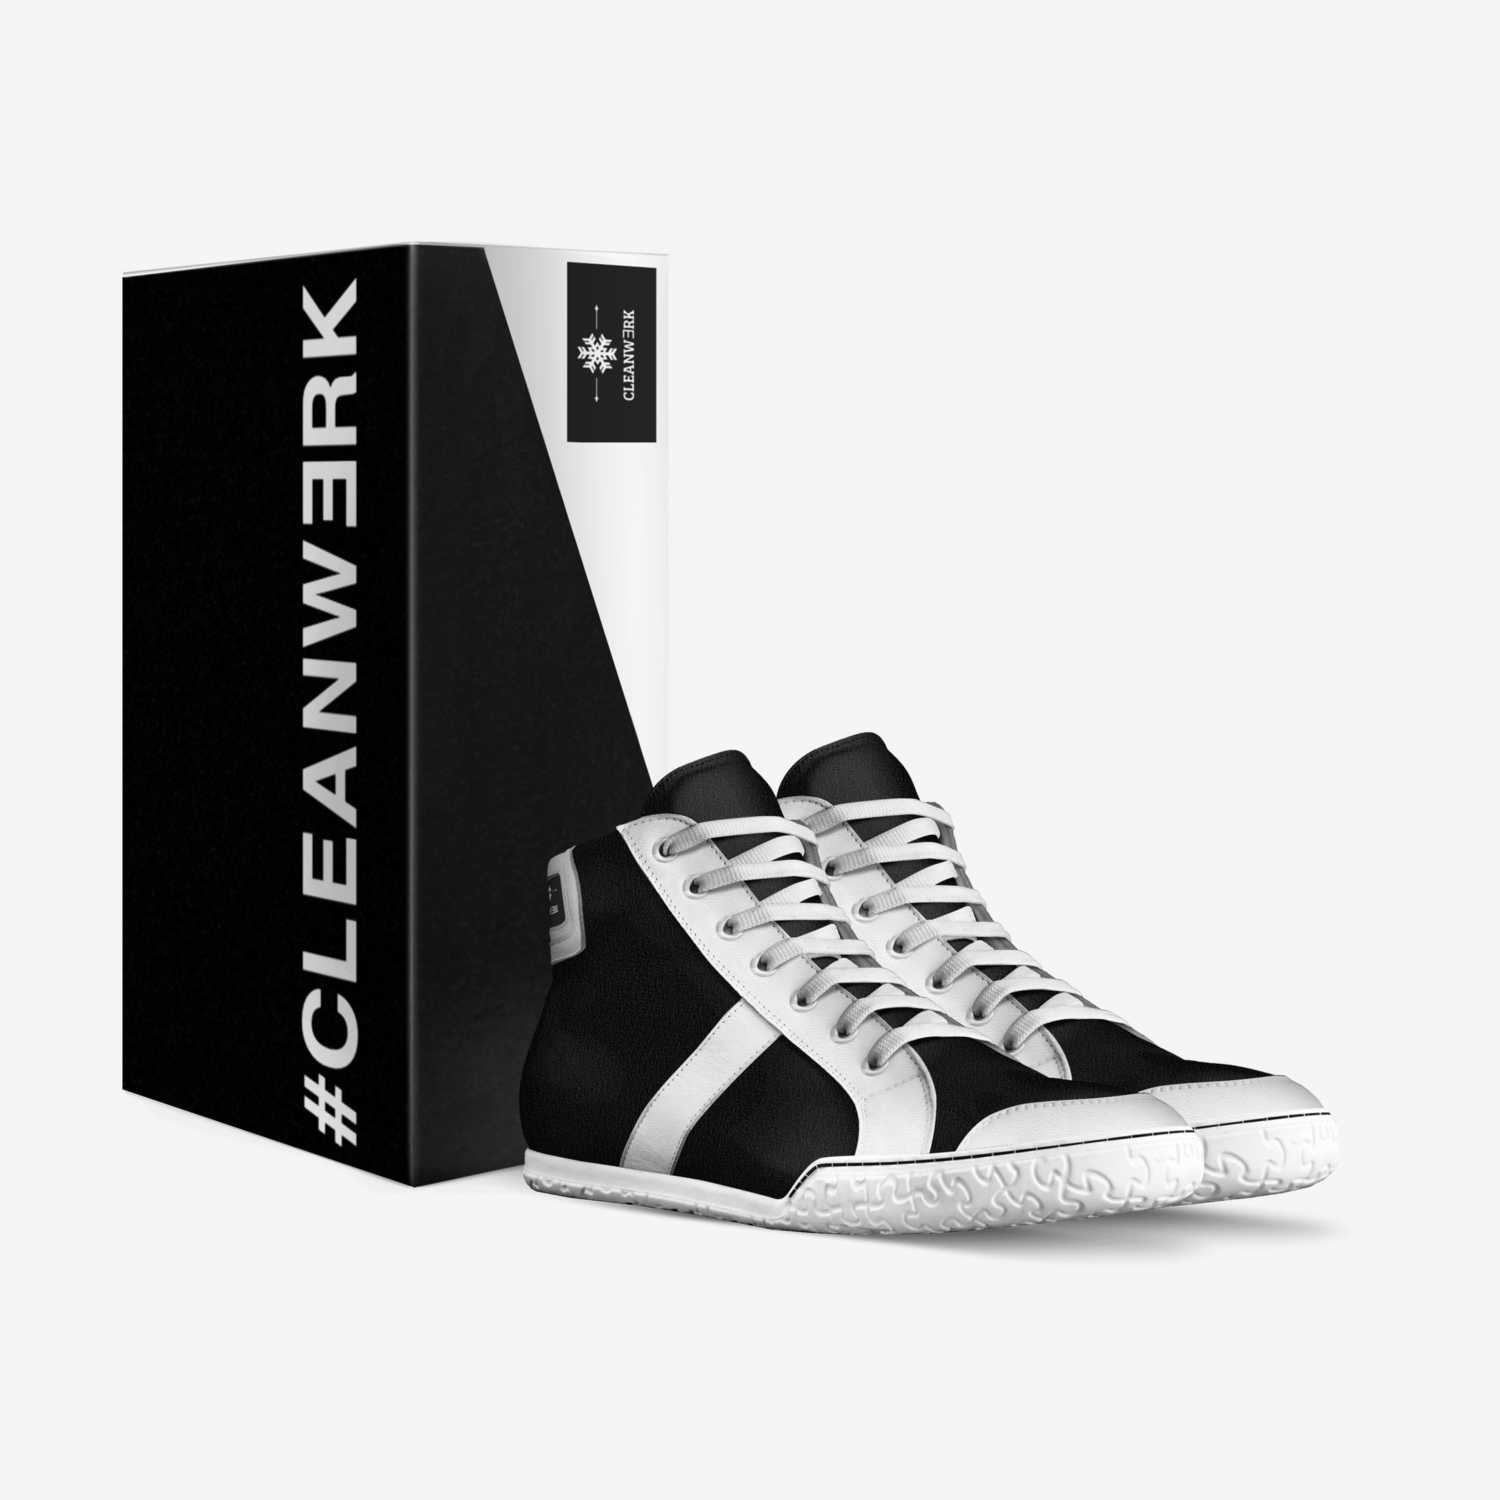 CLEANWƎRK custom made in Italy shoes by Anthoneus Mullen | Box view